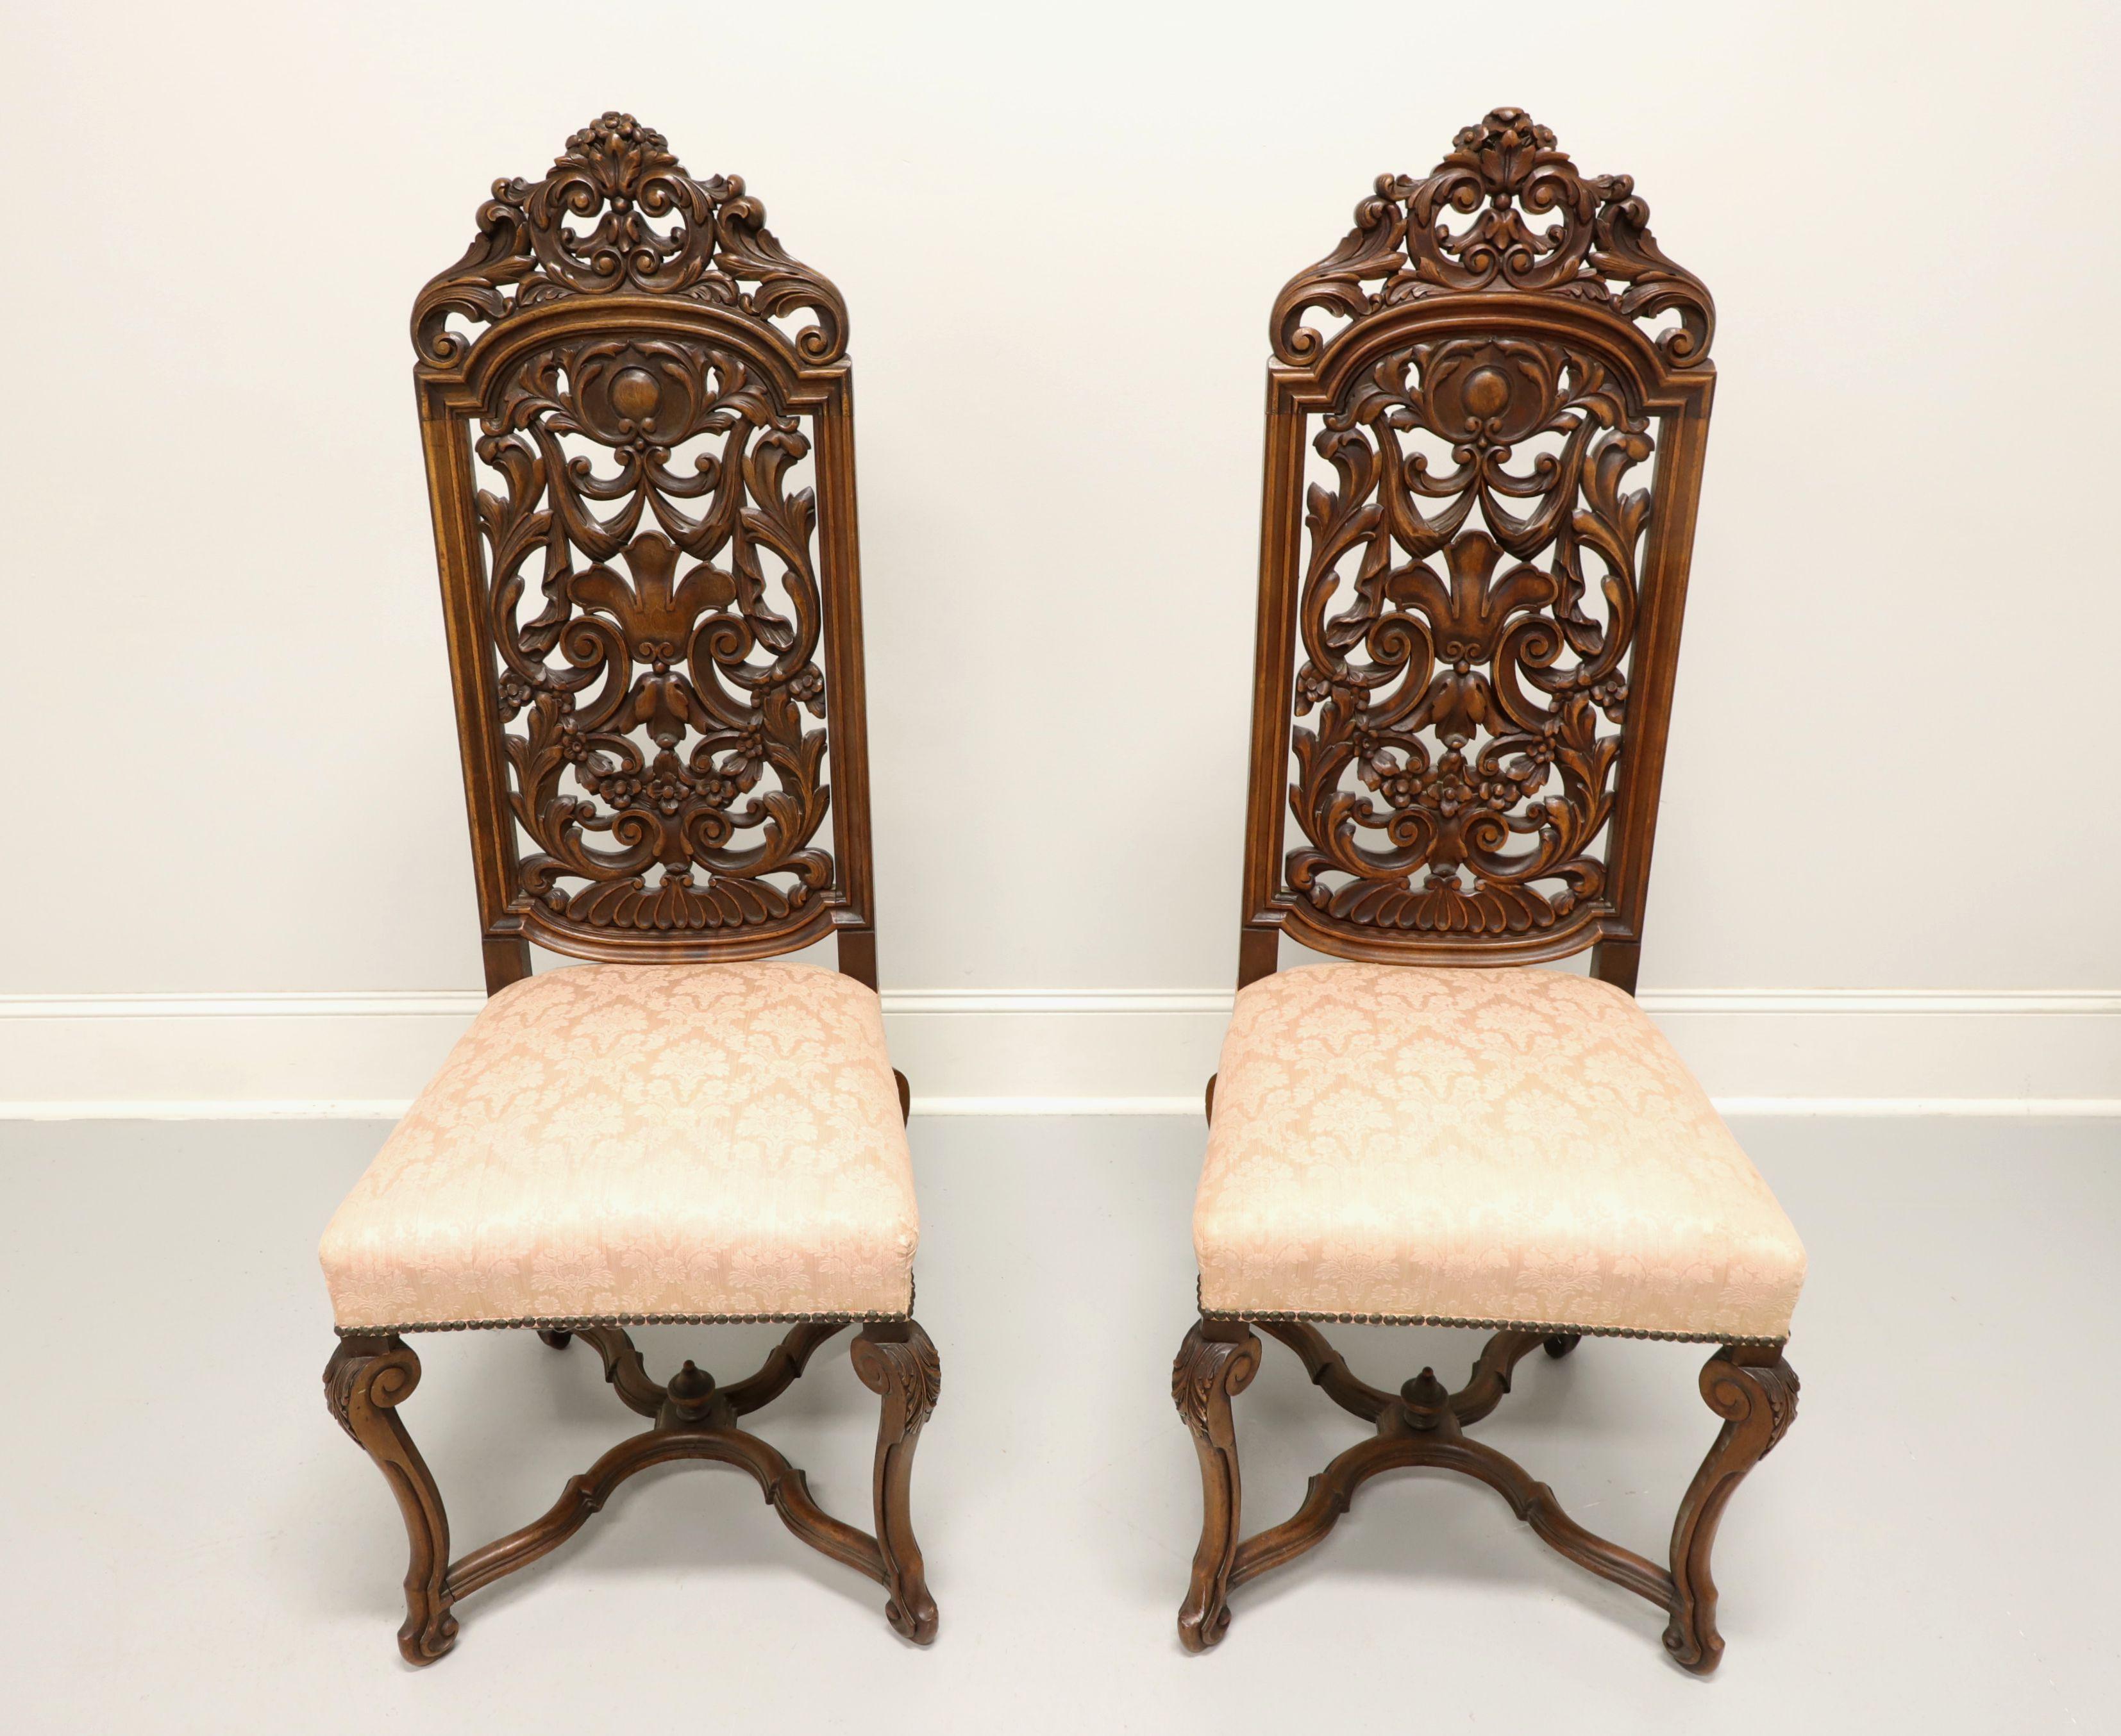 A pair of Renaissance Revival style side chairs, unbranded. Solid walnut with a tall, highly carved foliate design back, light pick color brocade fabric upholstered seat with nailhead trim, curved carved legs and carved stretchers with center